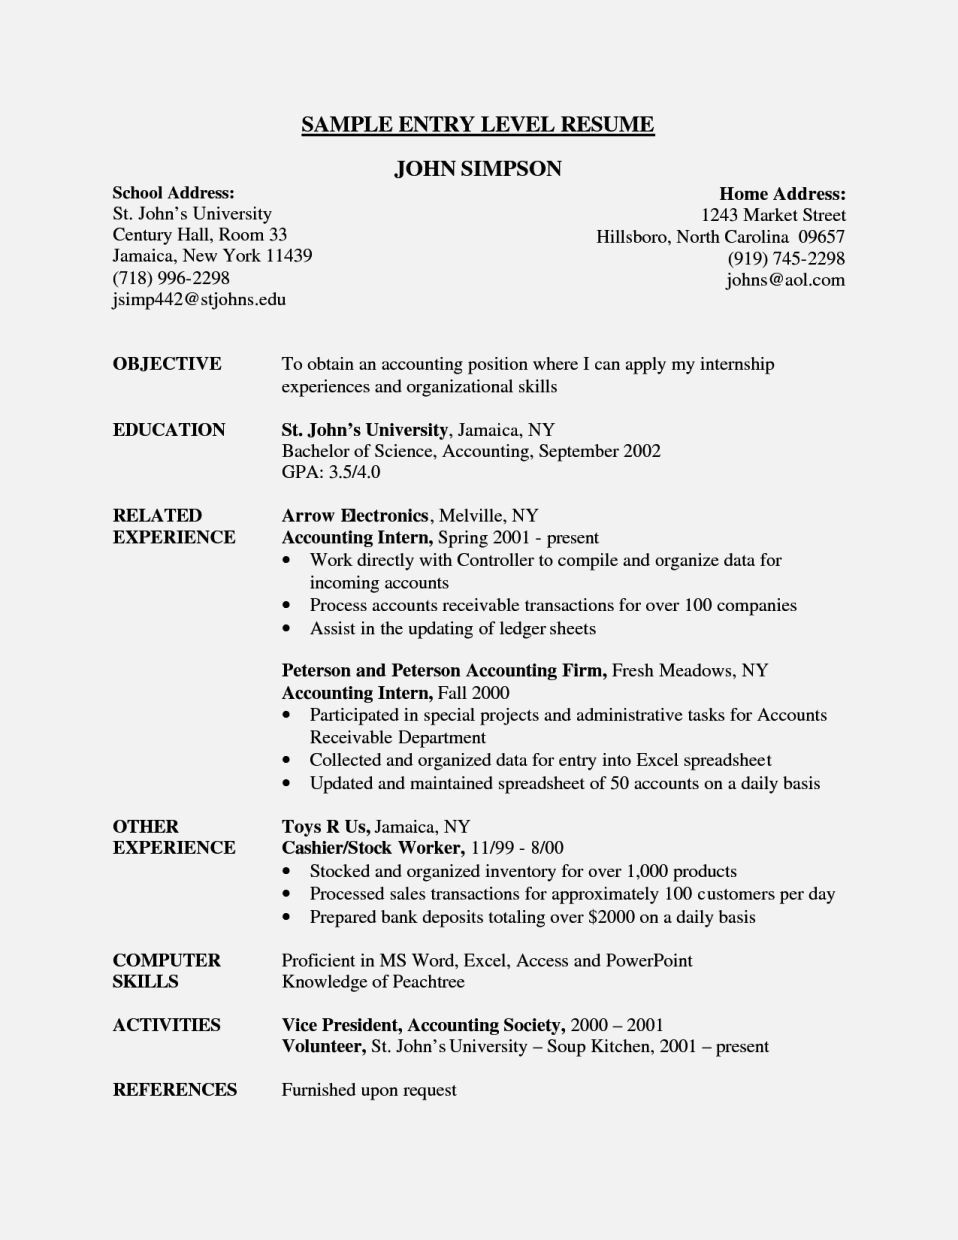 Sample Resume Objective Statements for Internship Internship Resume Objective October 2021